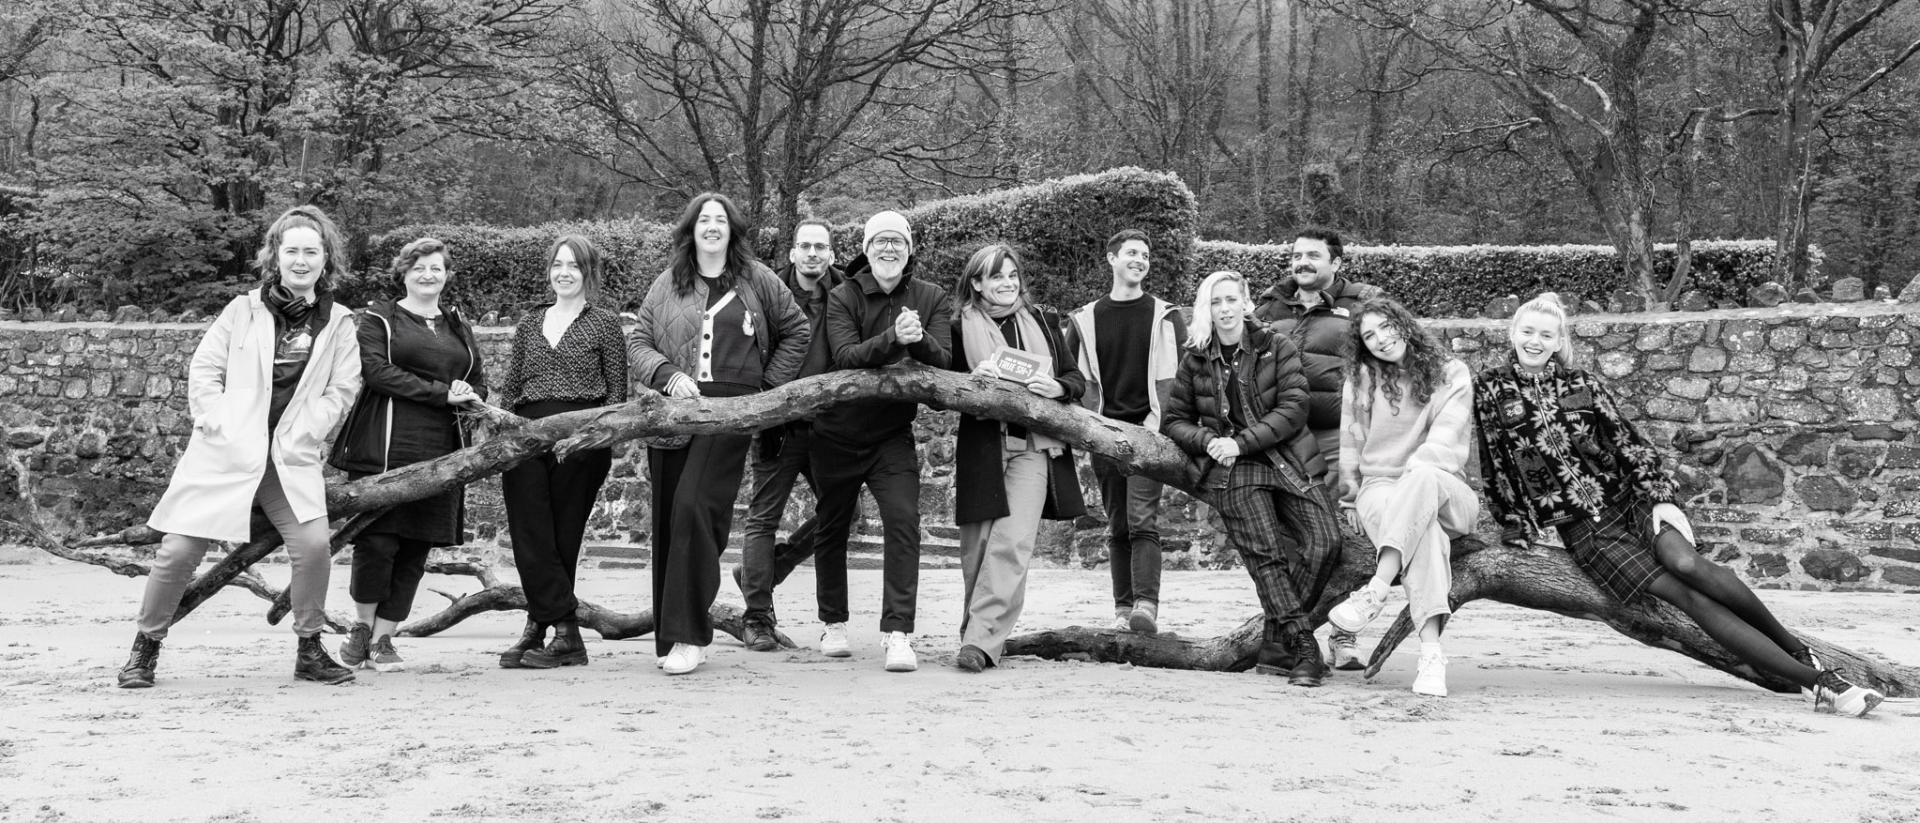 black and white photo of 12 people posing on a beach by a fallen tree trunk. behind them is a low stone wall and trees